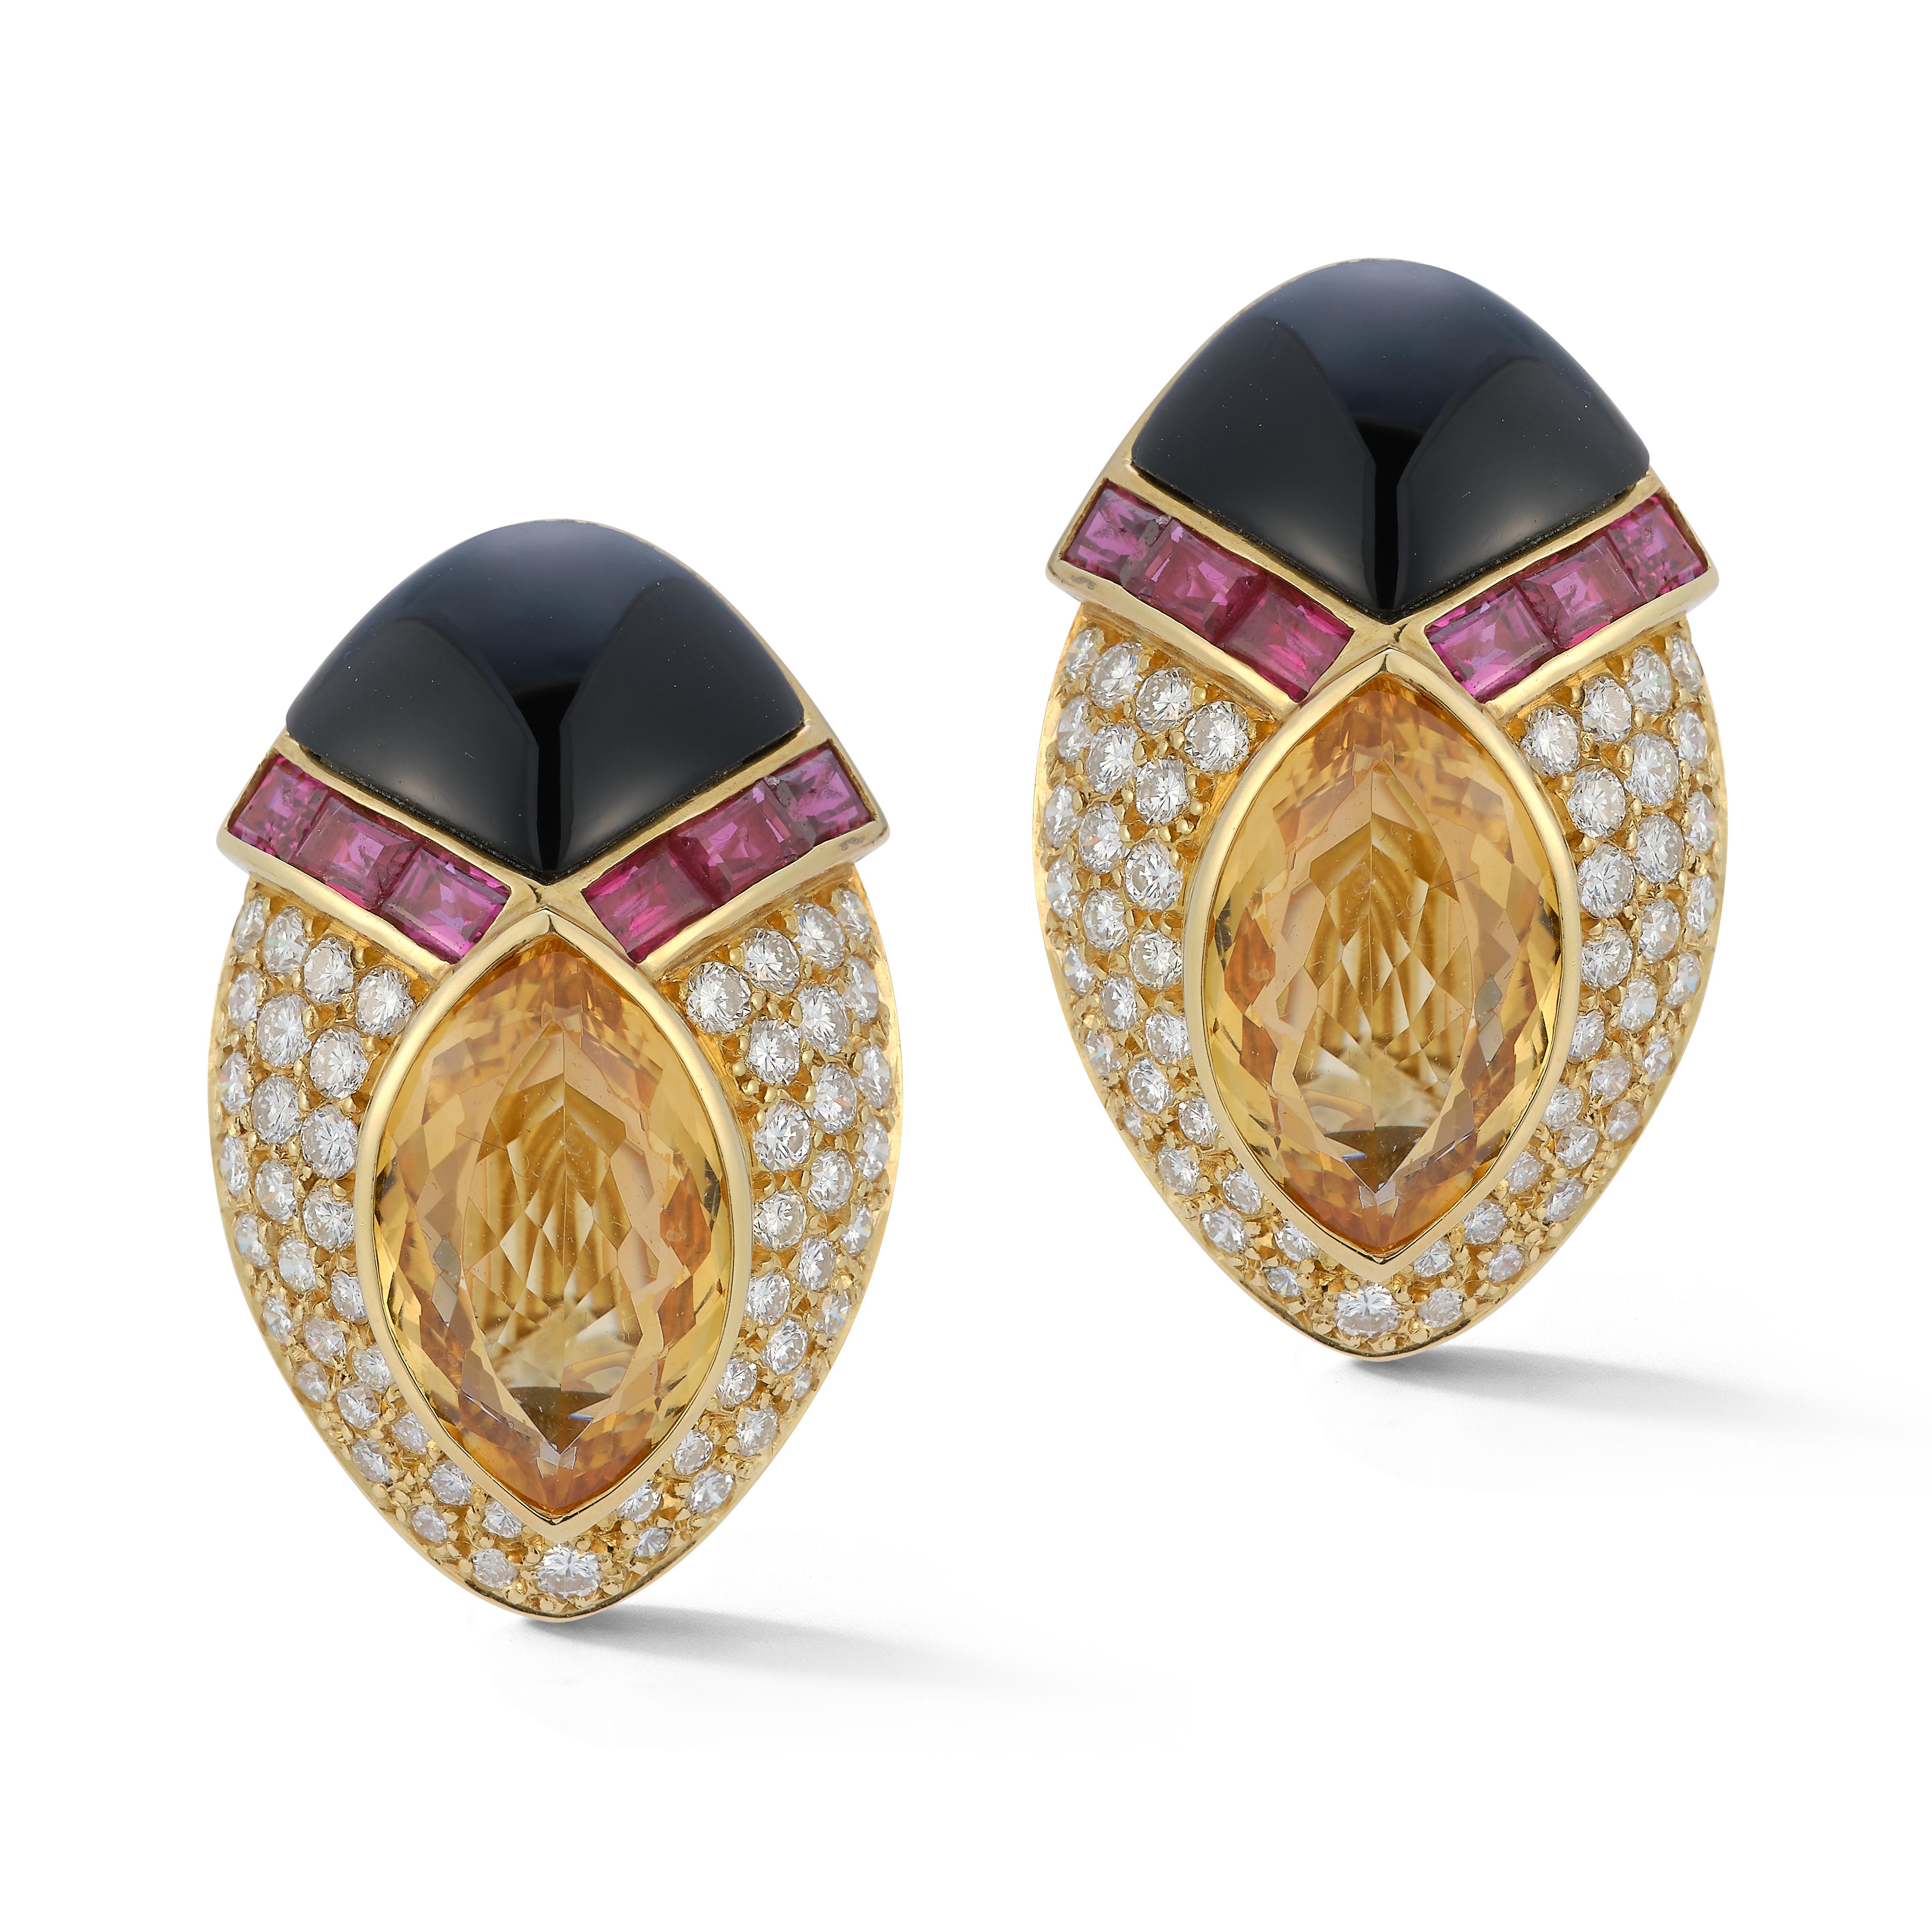 Diamond & Multi Gem Citrine Earrings with Onyx tips set in 18K Yellow Gold
104 diamonds,  approx 4.00 cts 
12 rubies 
2 citrines , approx 10.00 cts
Back Type: clip on
Measurements: 1” long
 
